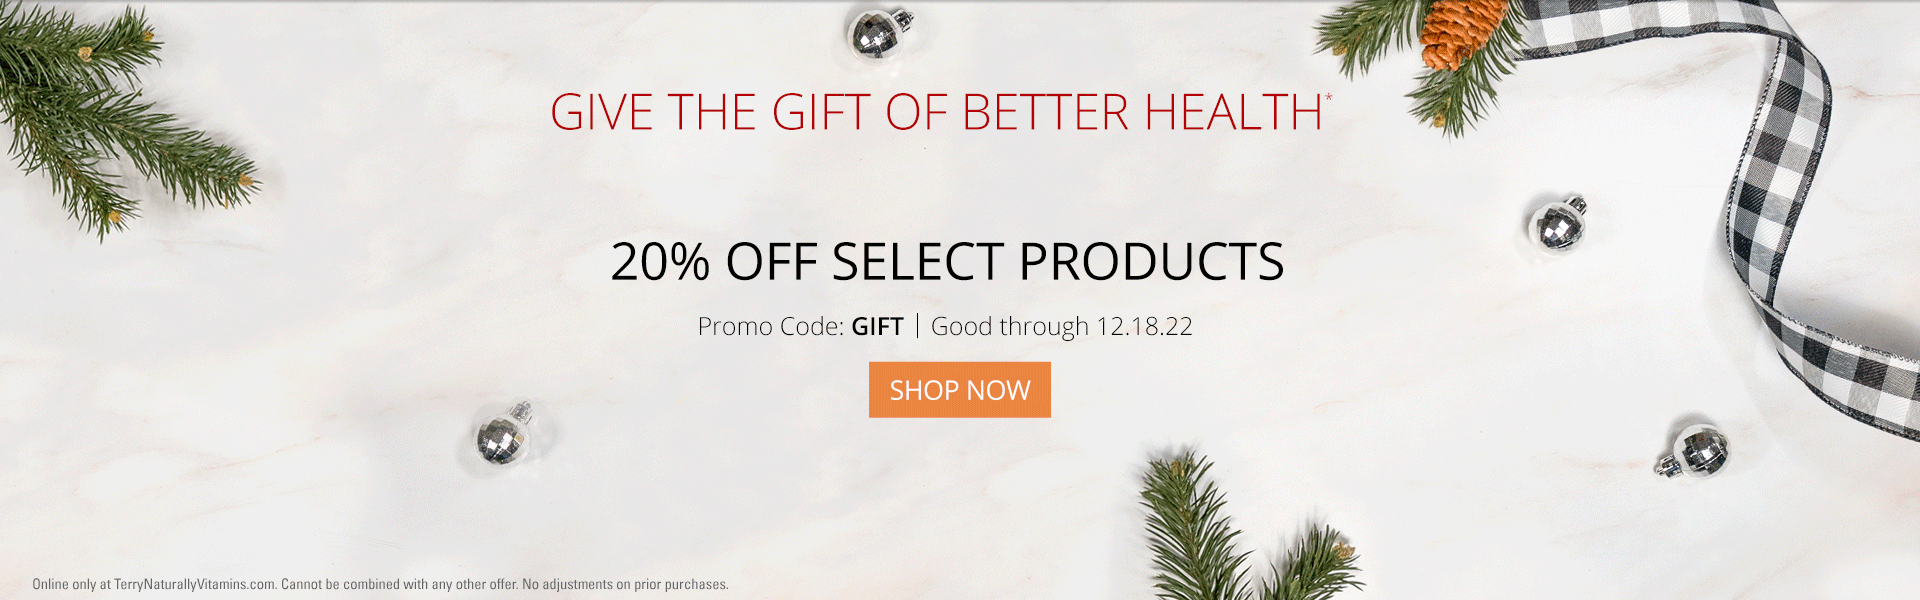 GIVE THE GIFT OF BETTER HEALTH* • 20% OFF SELECT PRODUCTS